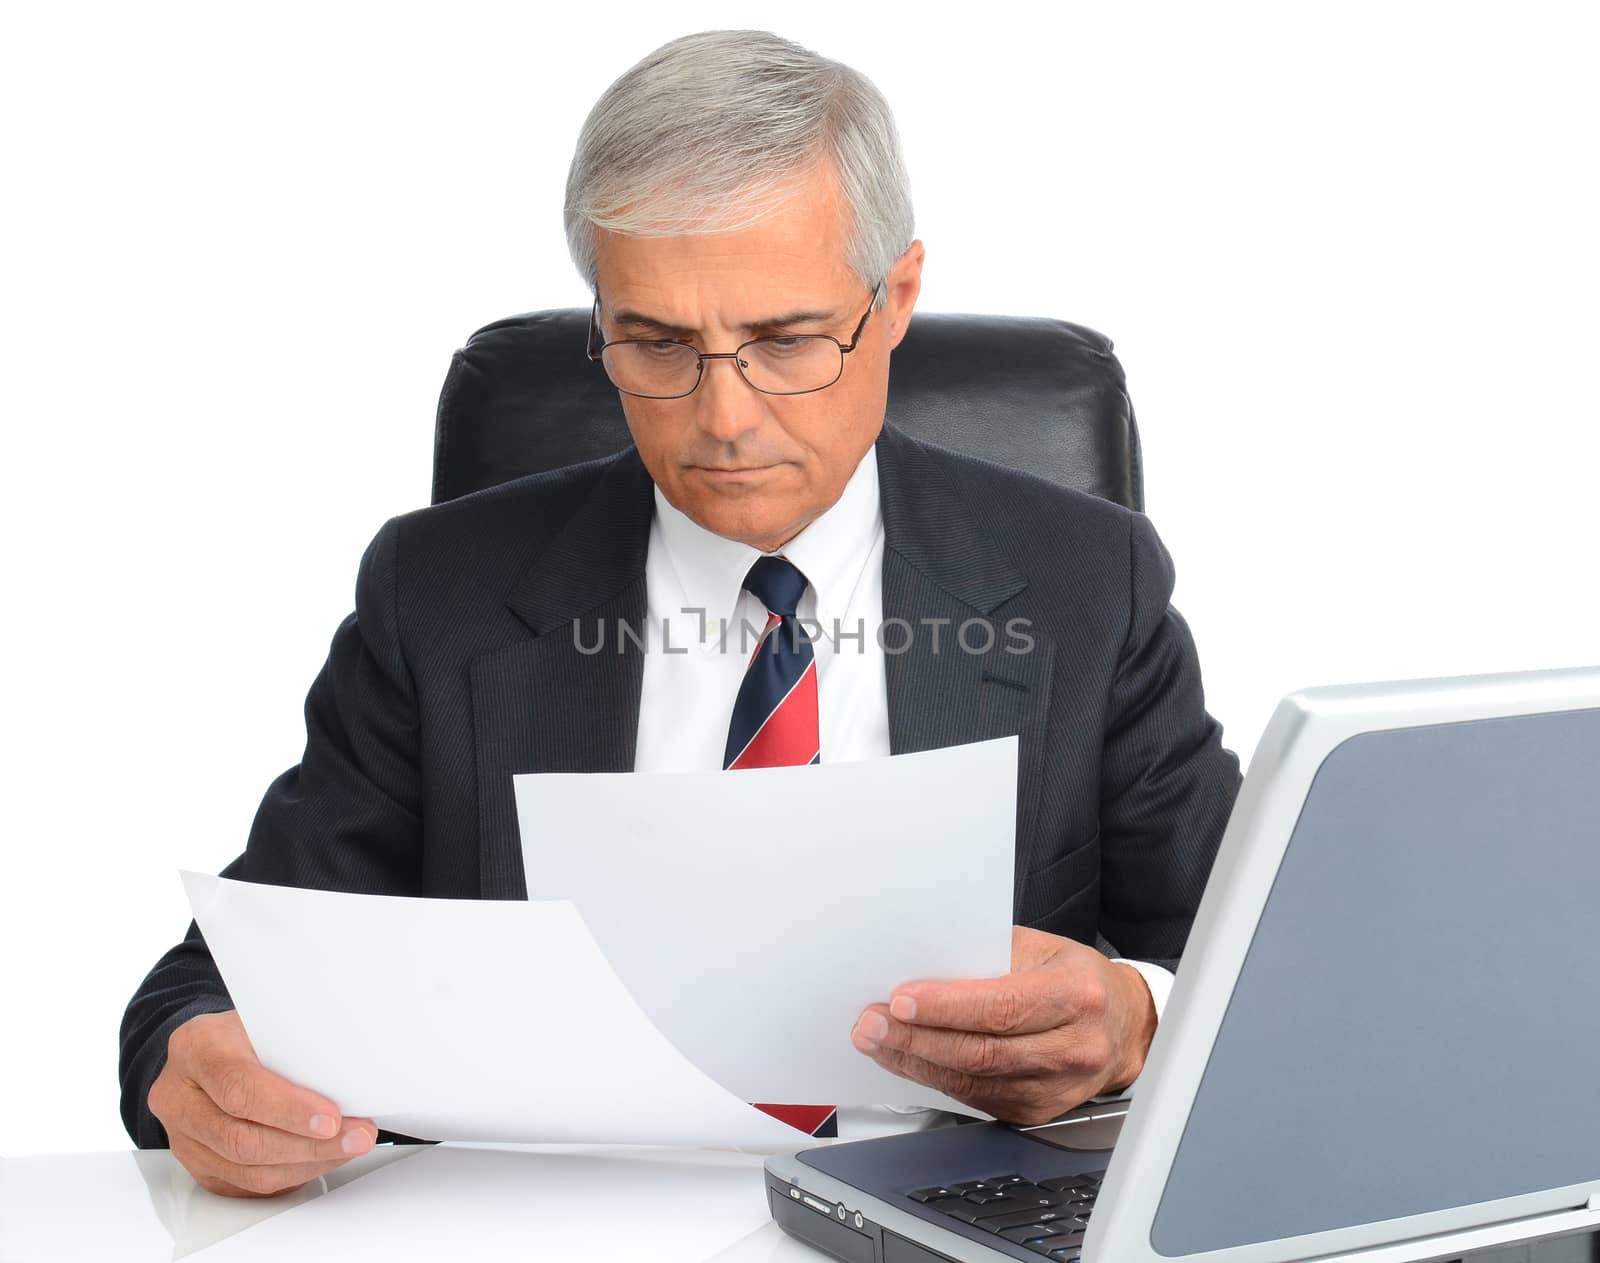 Mature businessman at desk reading papers. Man is wearing eye glasses and has a laptop computer.